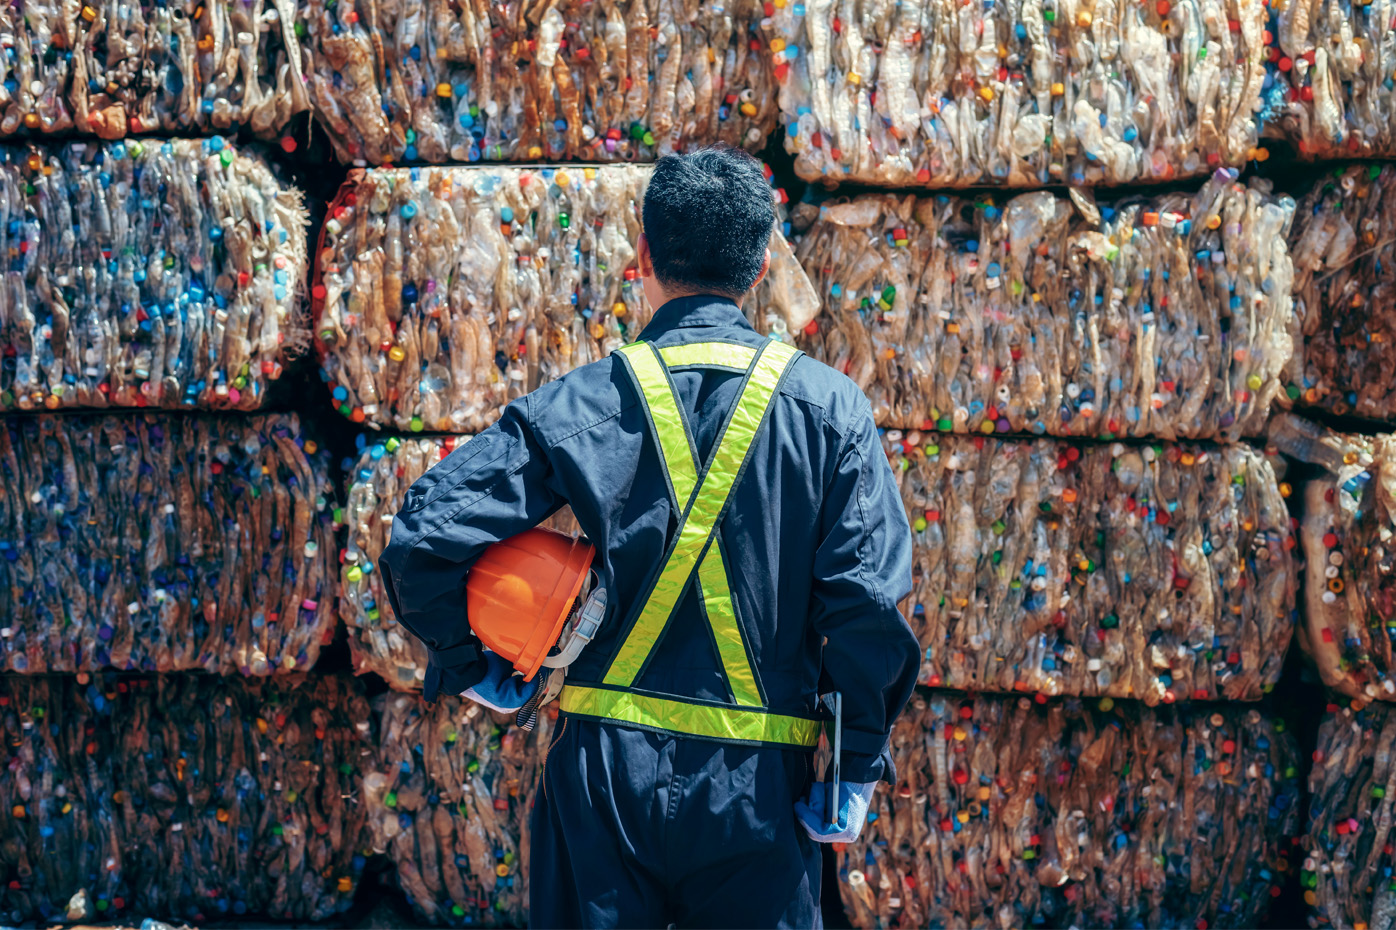 Engineer stands in front of bales of recycled plastic bottles